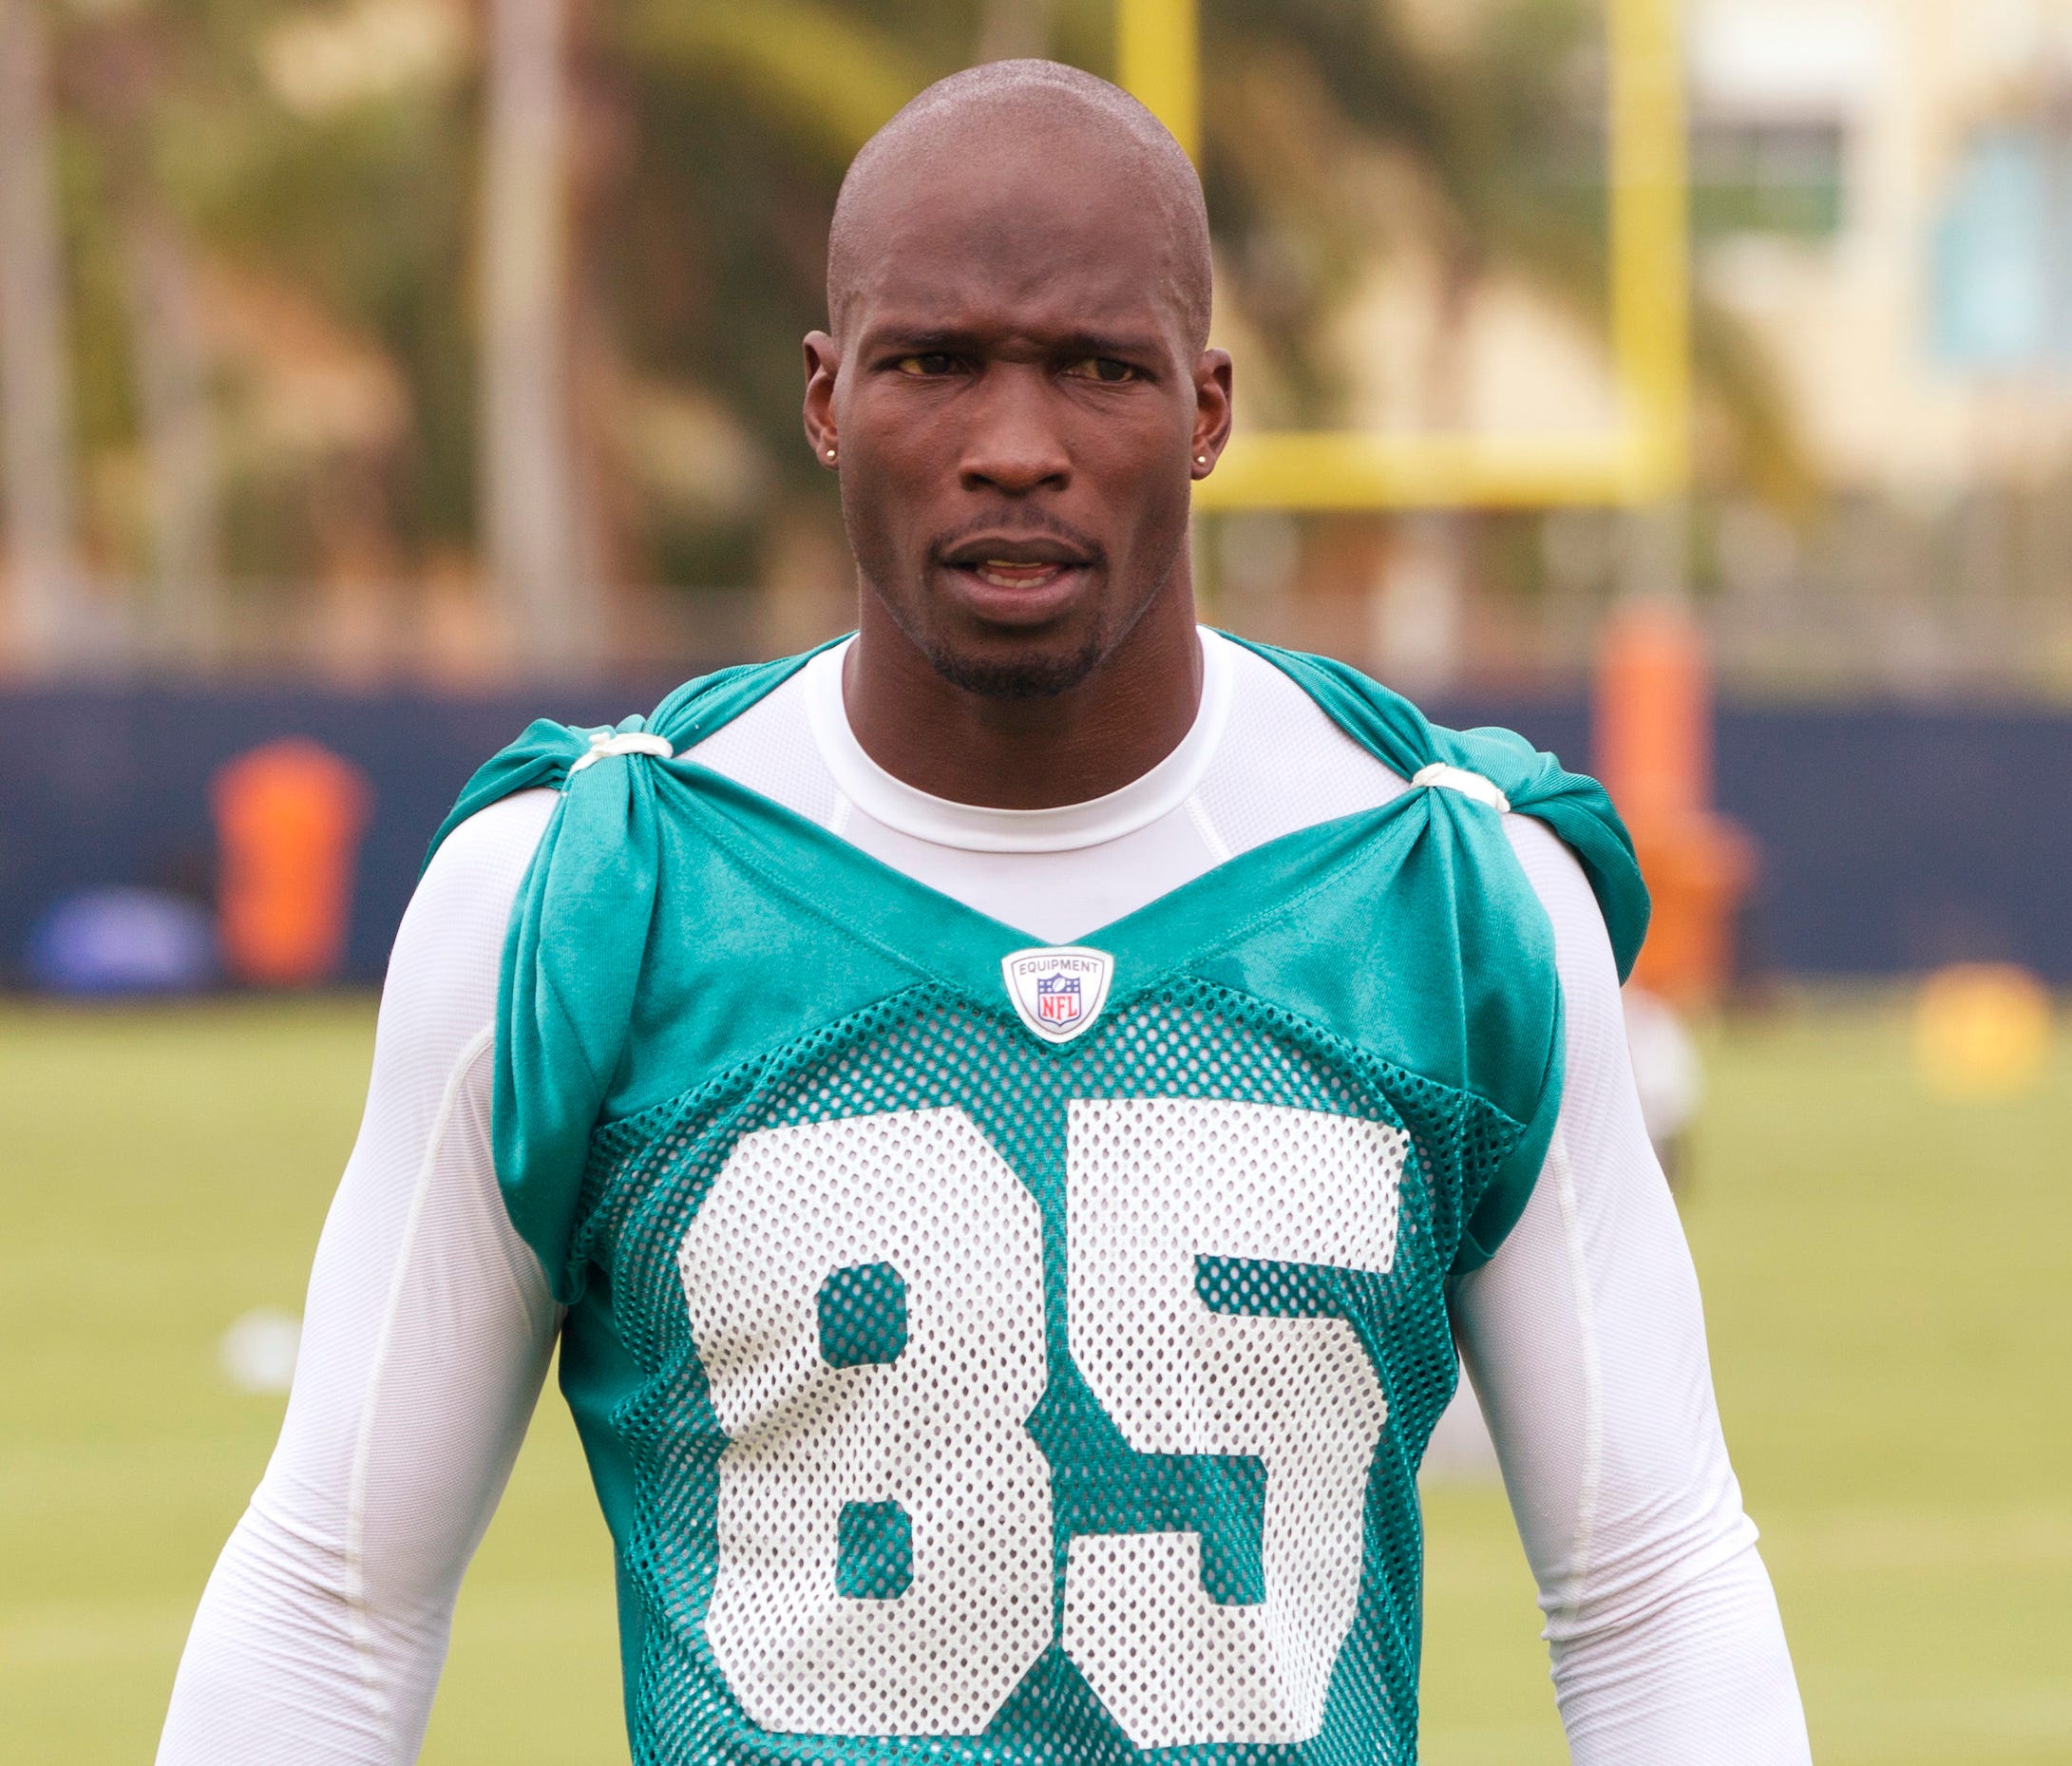 A man was arrested in Colorado for attempting to impersonate former receiver Chad Johnson while making purchases at a Louis Vuitton store.